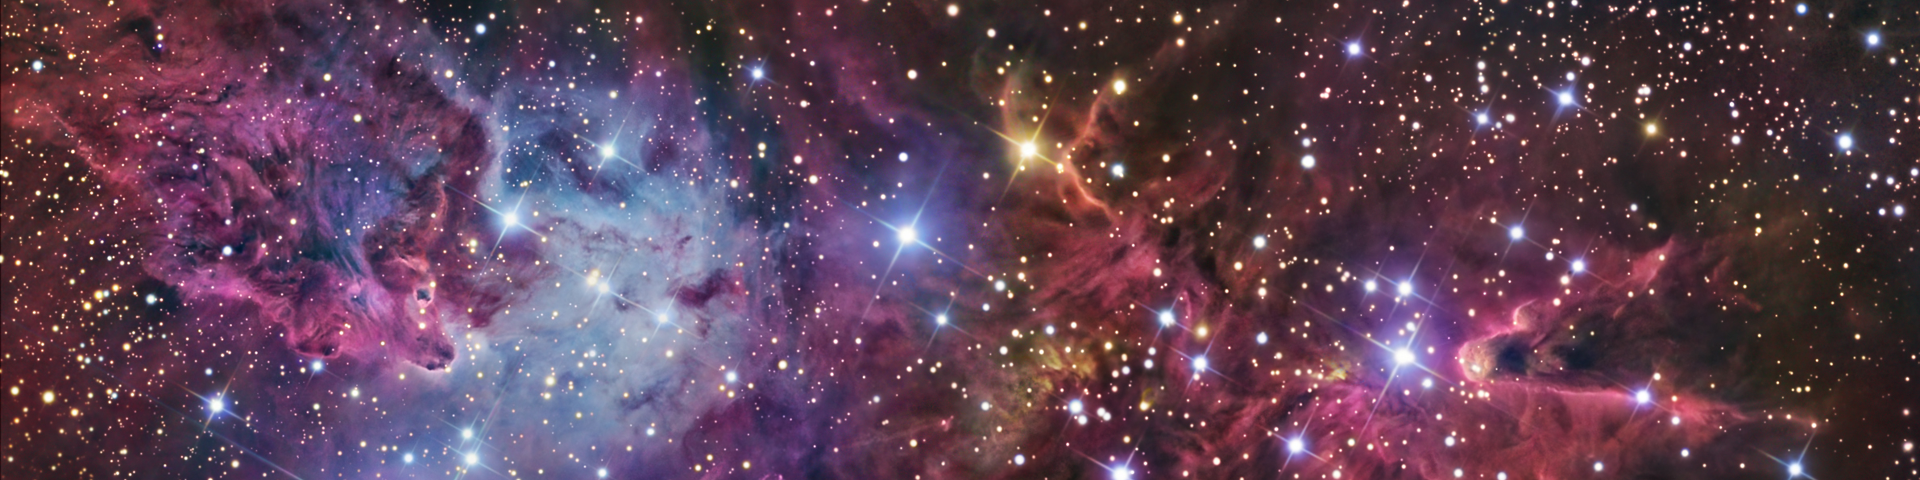 Nebulae and star clusters.